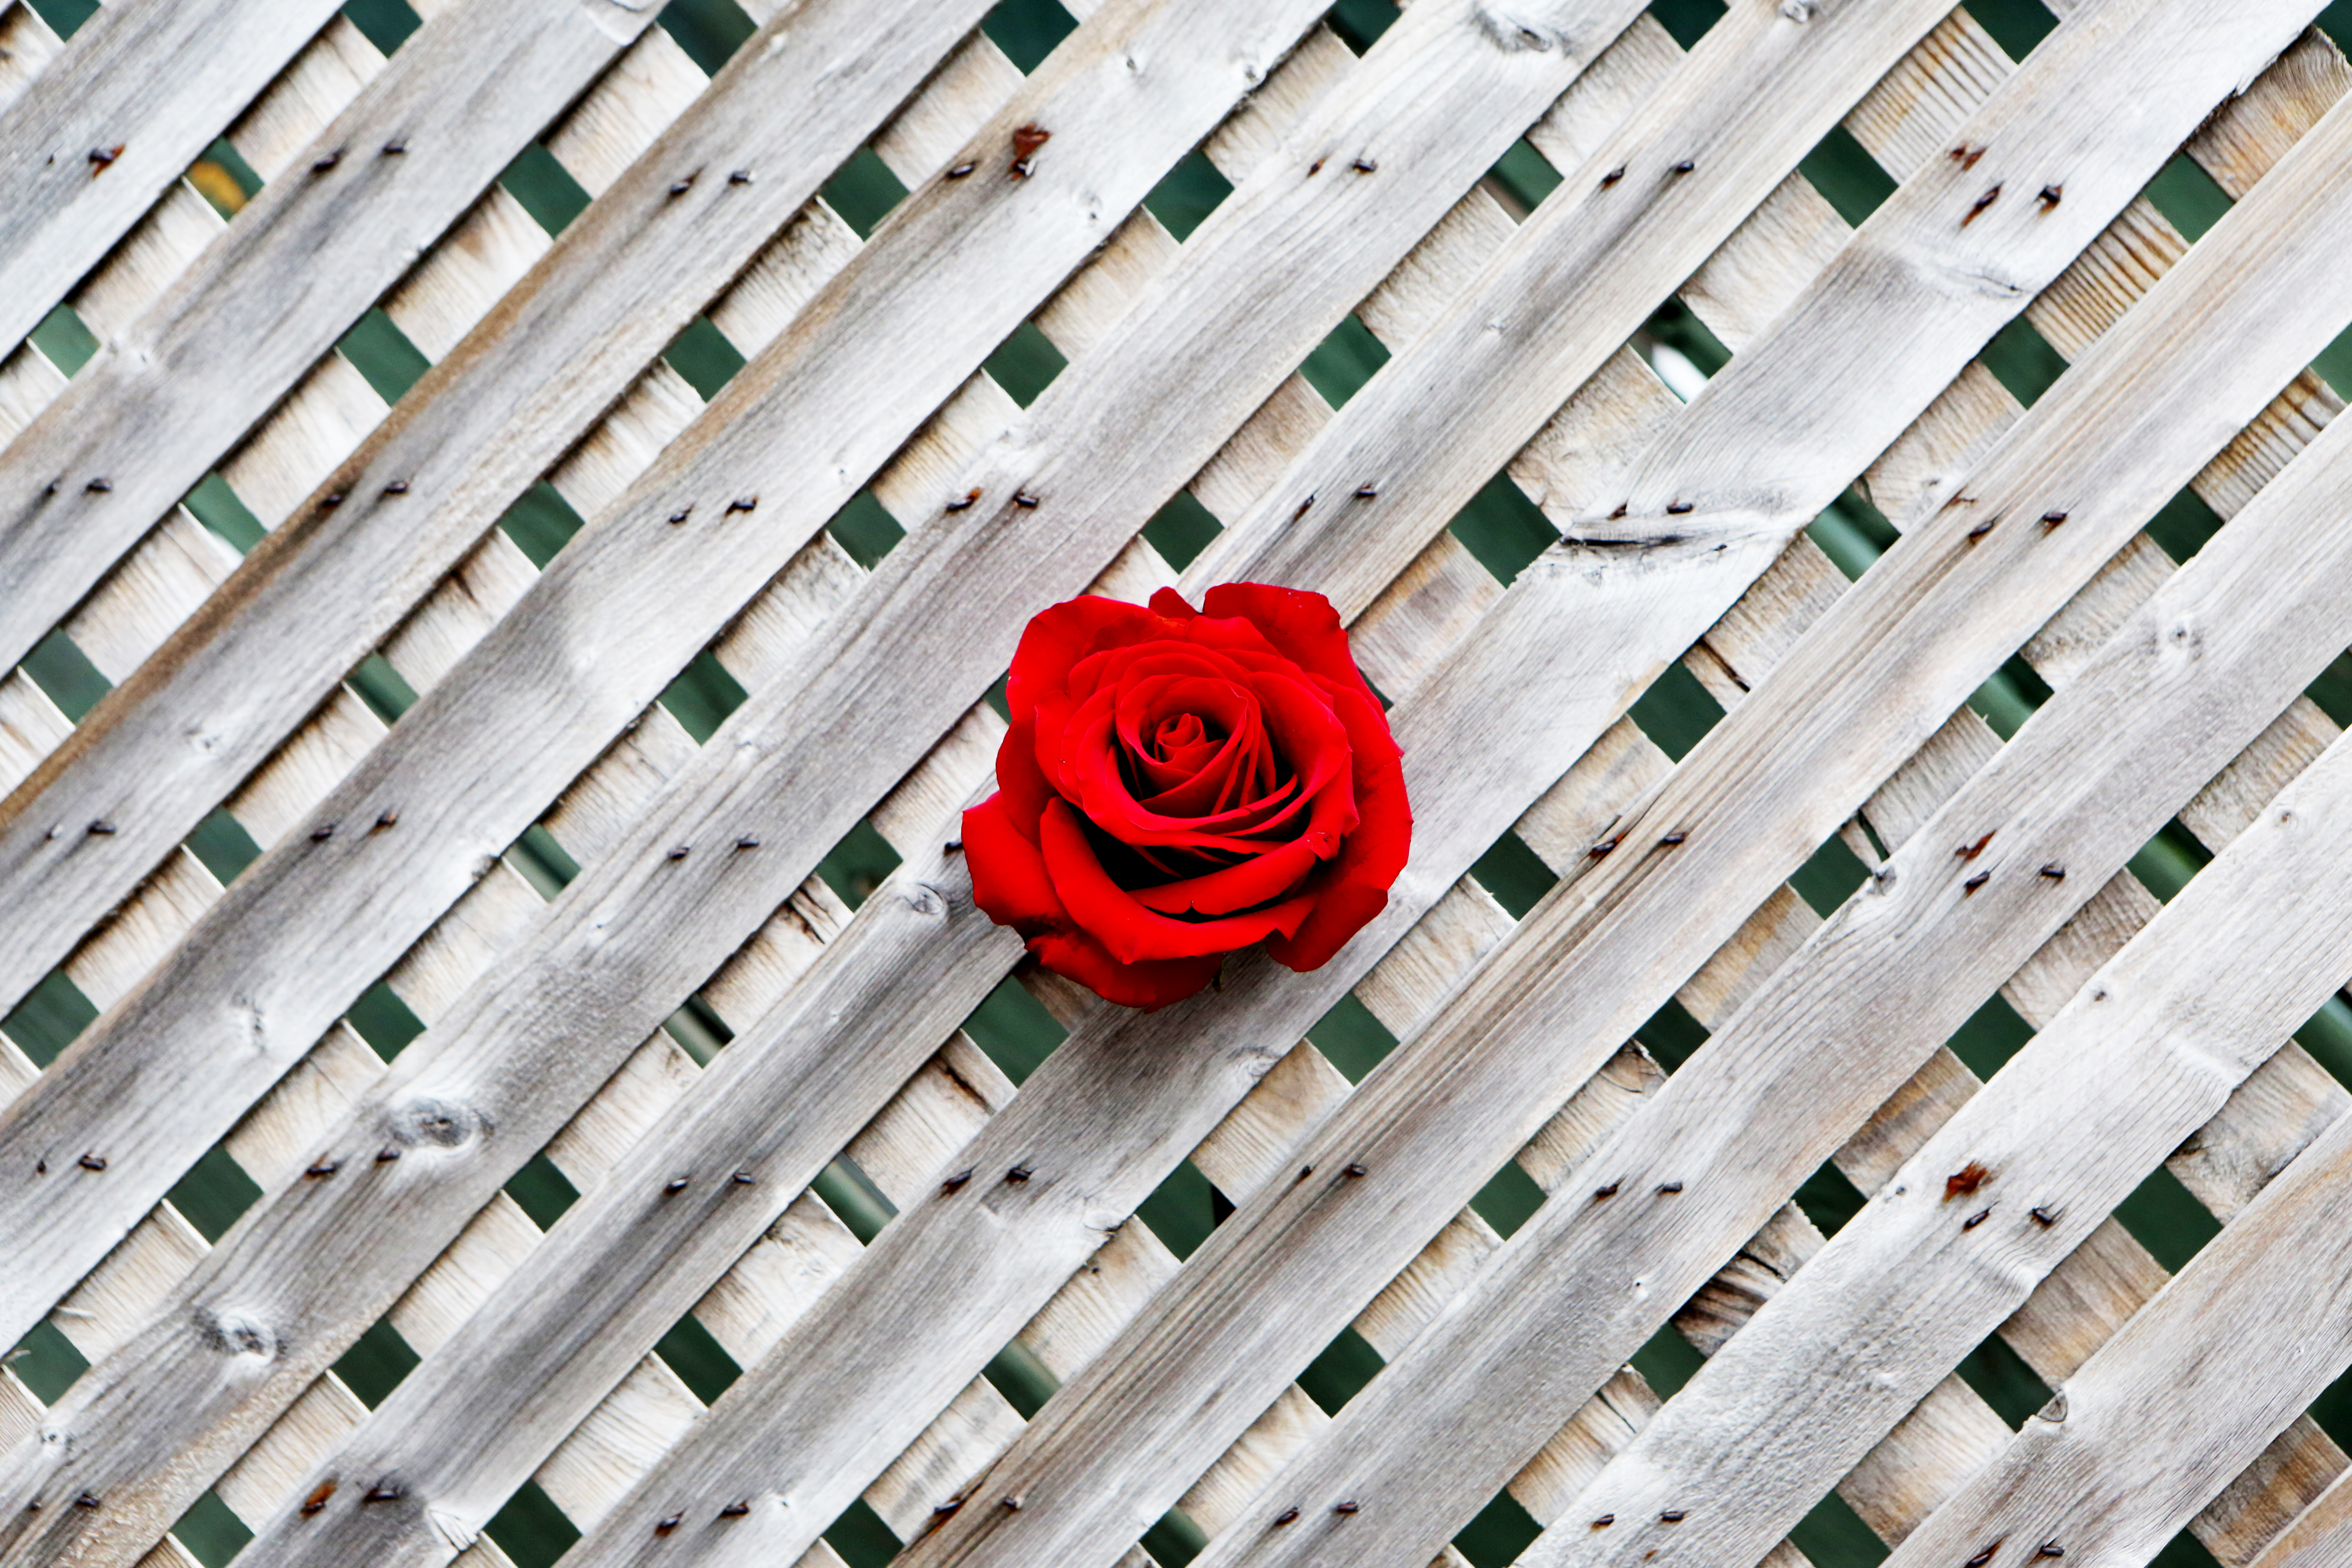 Download PC Wallpaper rose, red, wood, wooden, rose flower, minimalism, wall, fence